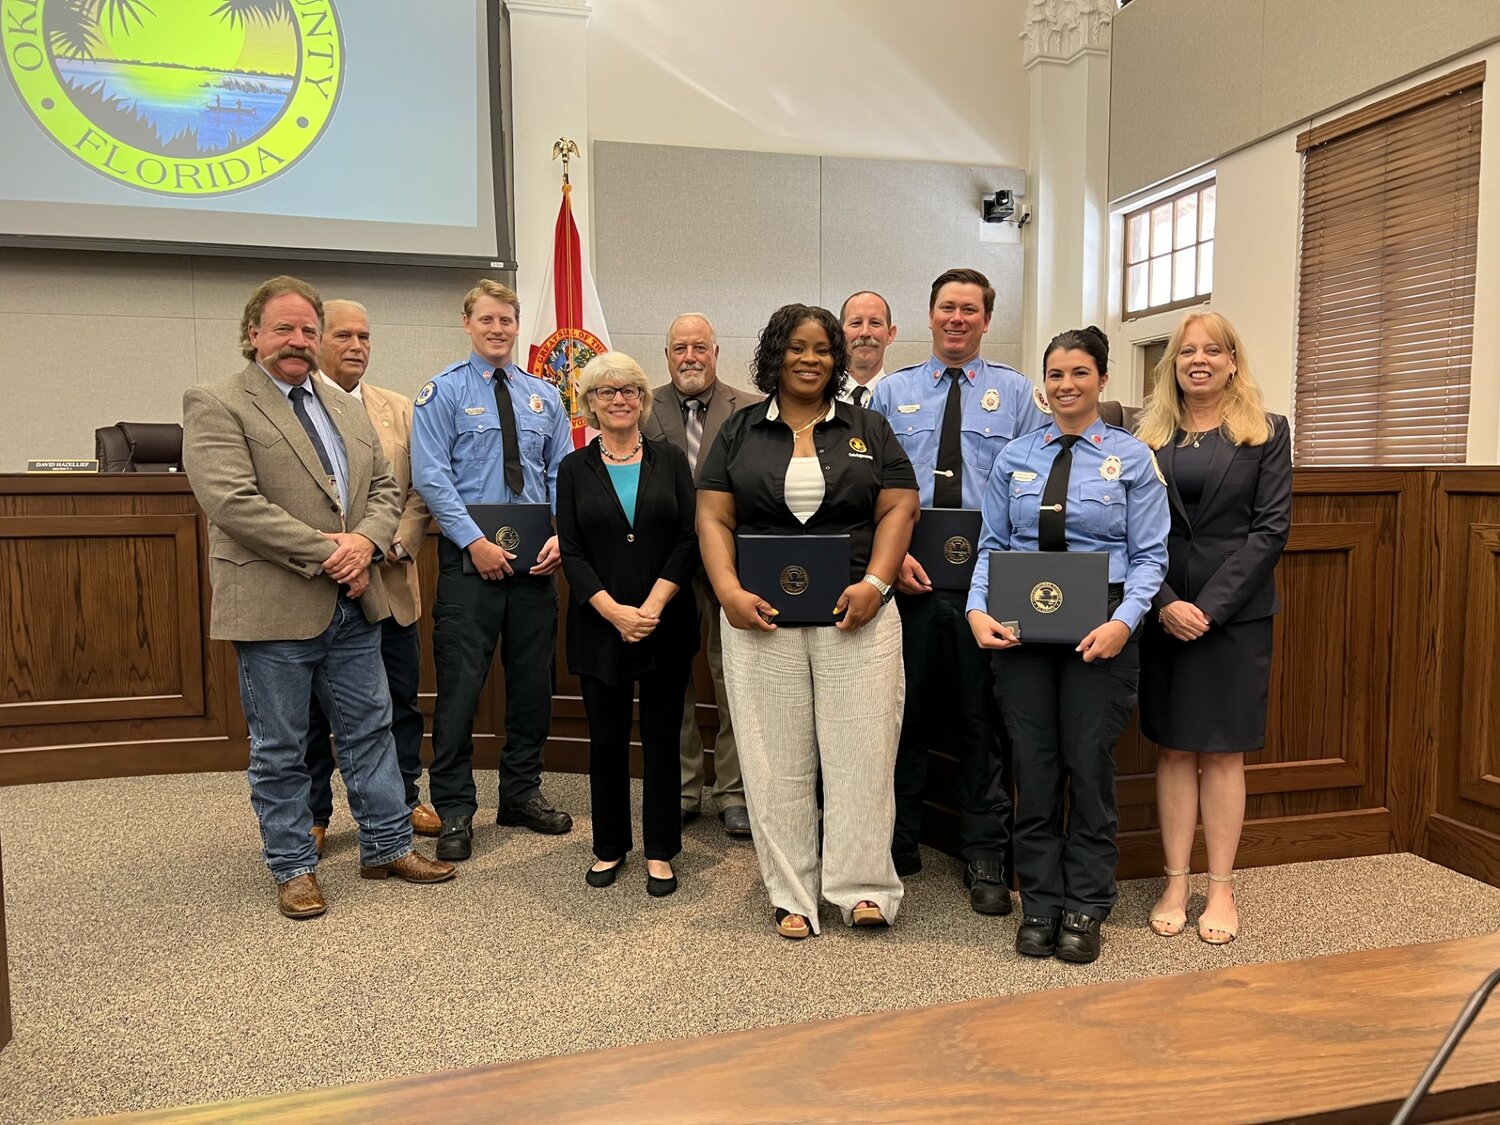 OKEECHOBEE -- Okeechobee County commissioners honored employees for milestone years of service at the Aug. 10 commission meeting.